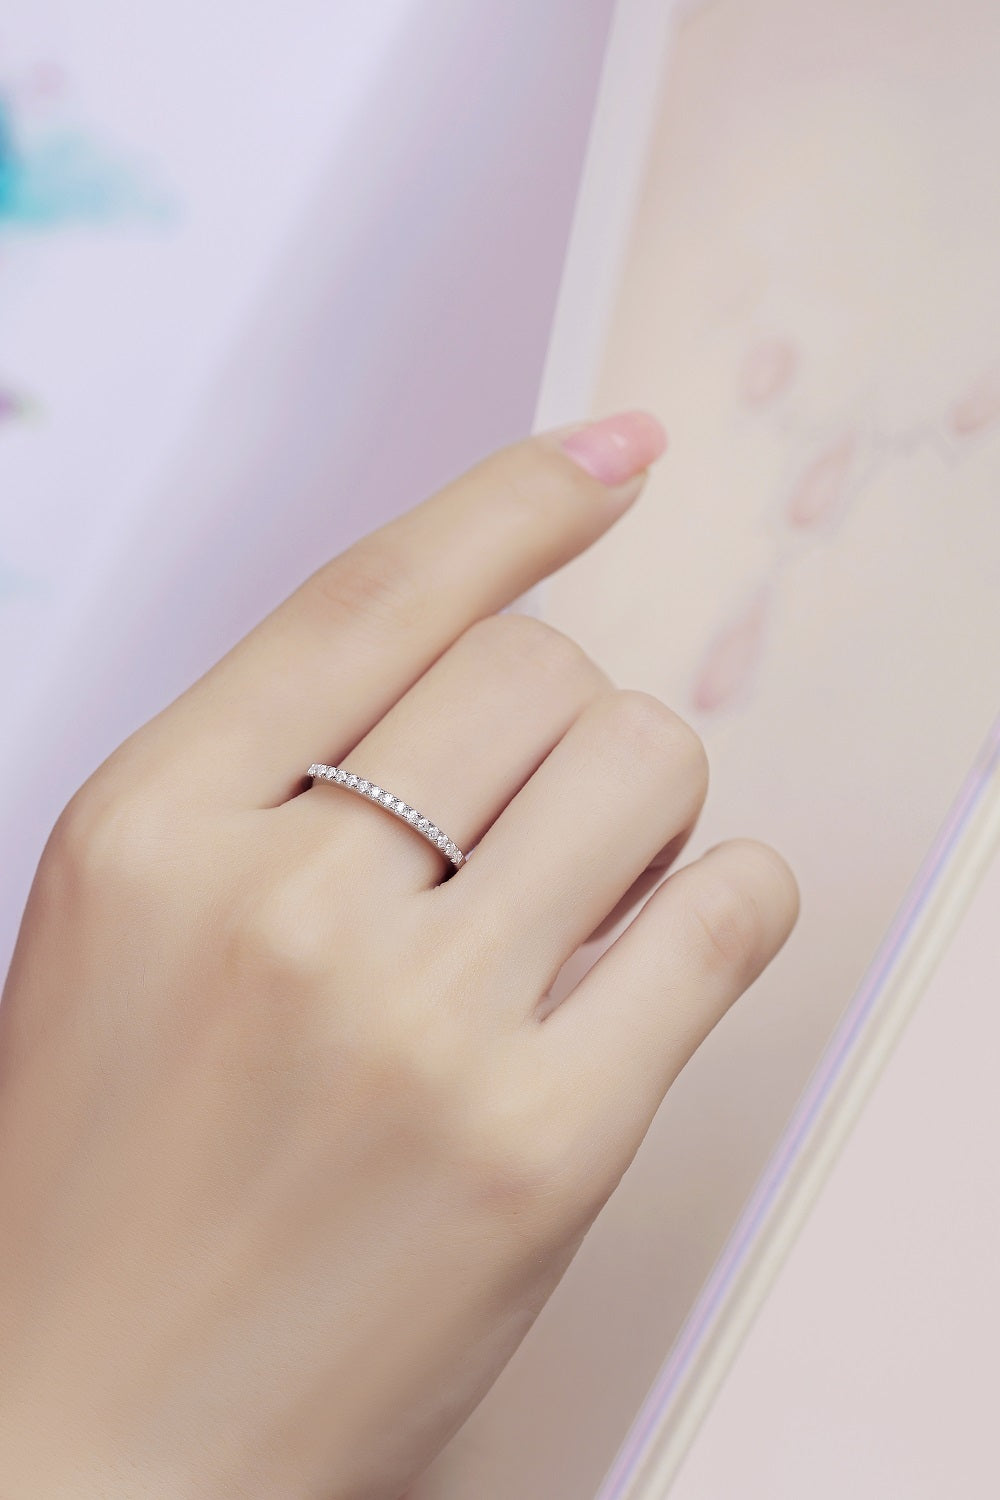 【02LIVE # link 27 - BUY 1 GET 1 free ring】S925 Silver Adjustable Moissanite Pick up light Rings R12463